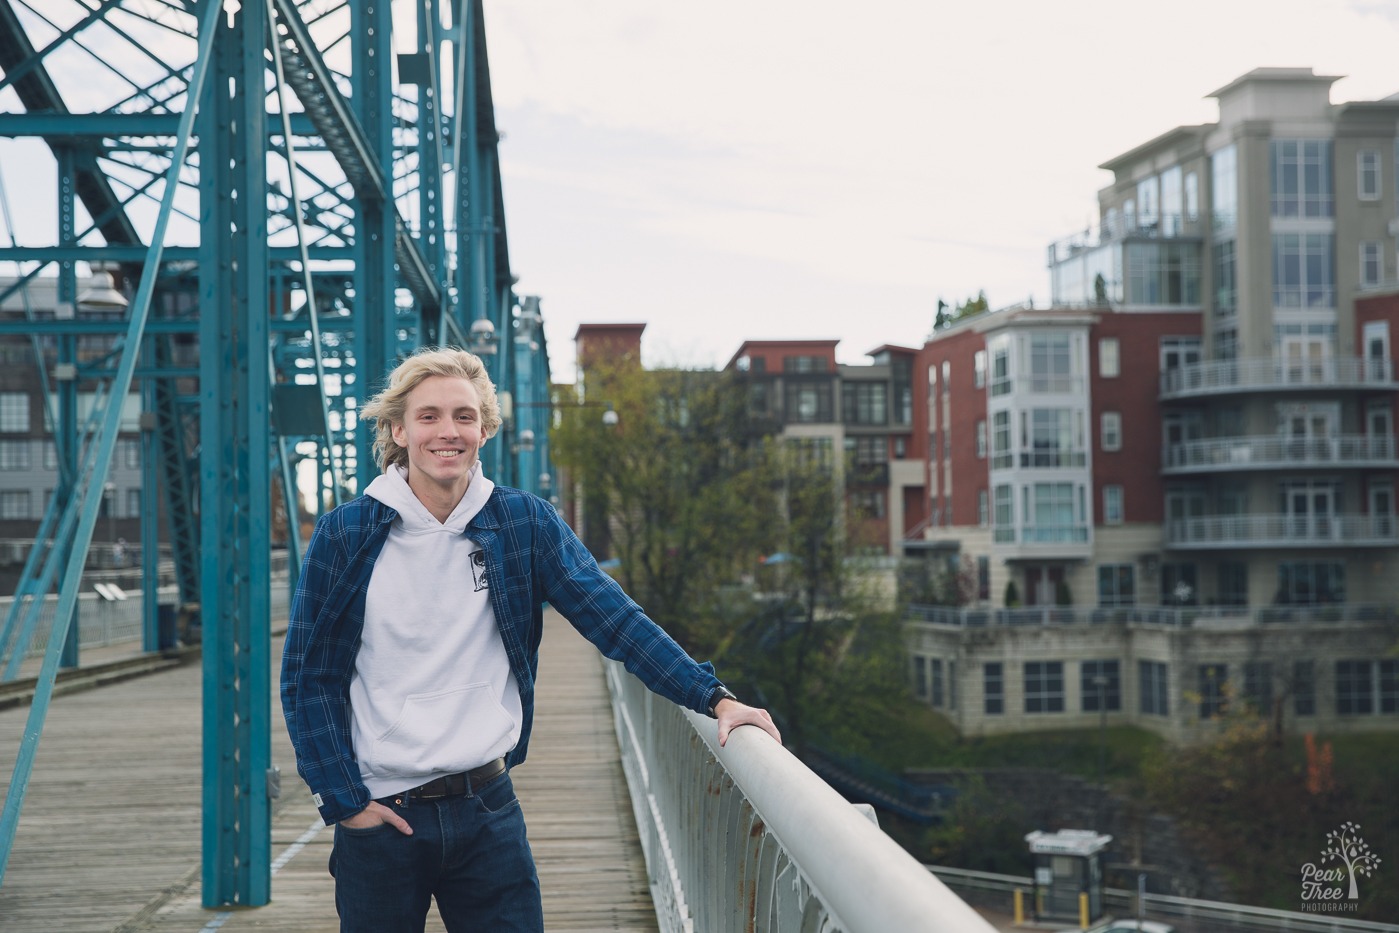 Blond high school senior boy wearing white hoodie, blue flannel shirt, and jeans standing smiling on blue Chattanooga bridge